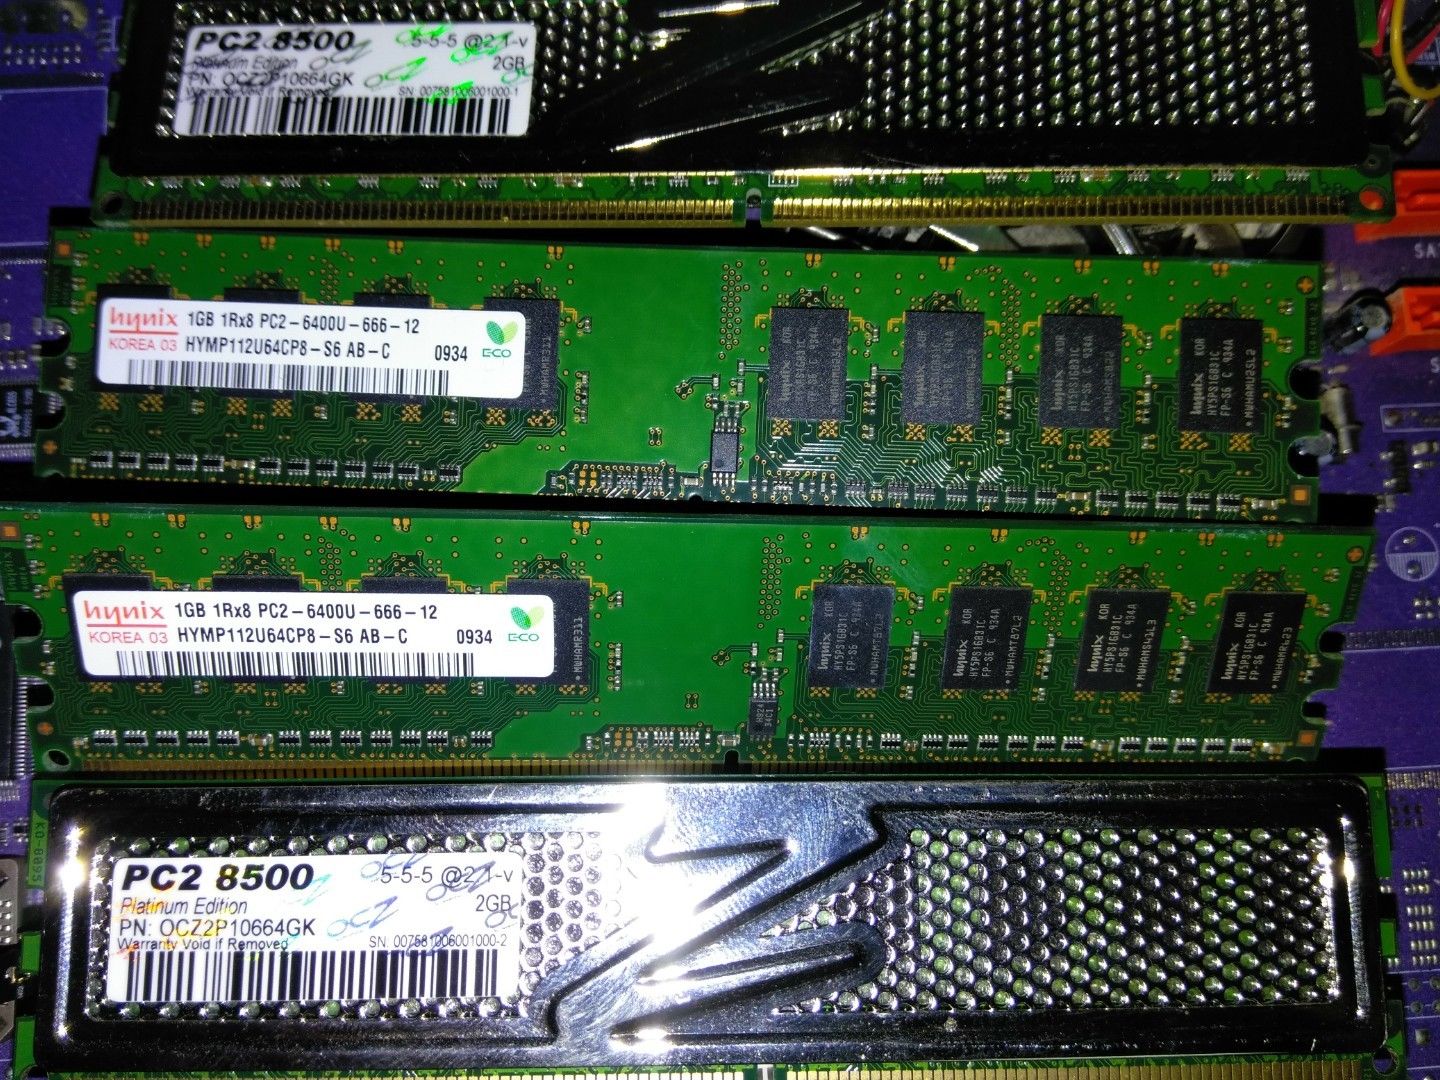 For sale ecs kn1 Extreme abit ax78 3 cpu's HD3870 ATi video card and lots of ddr memory